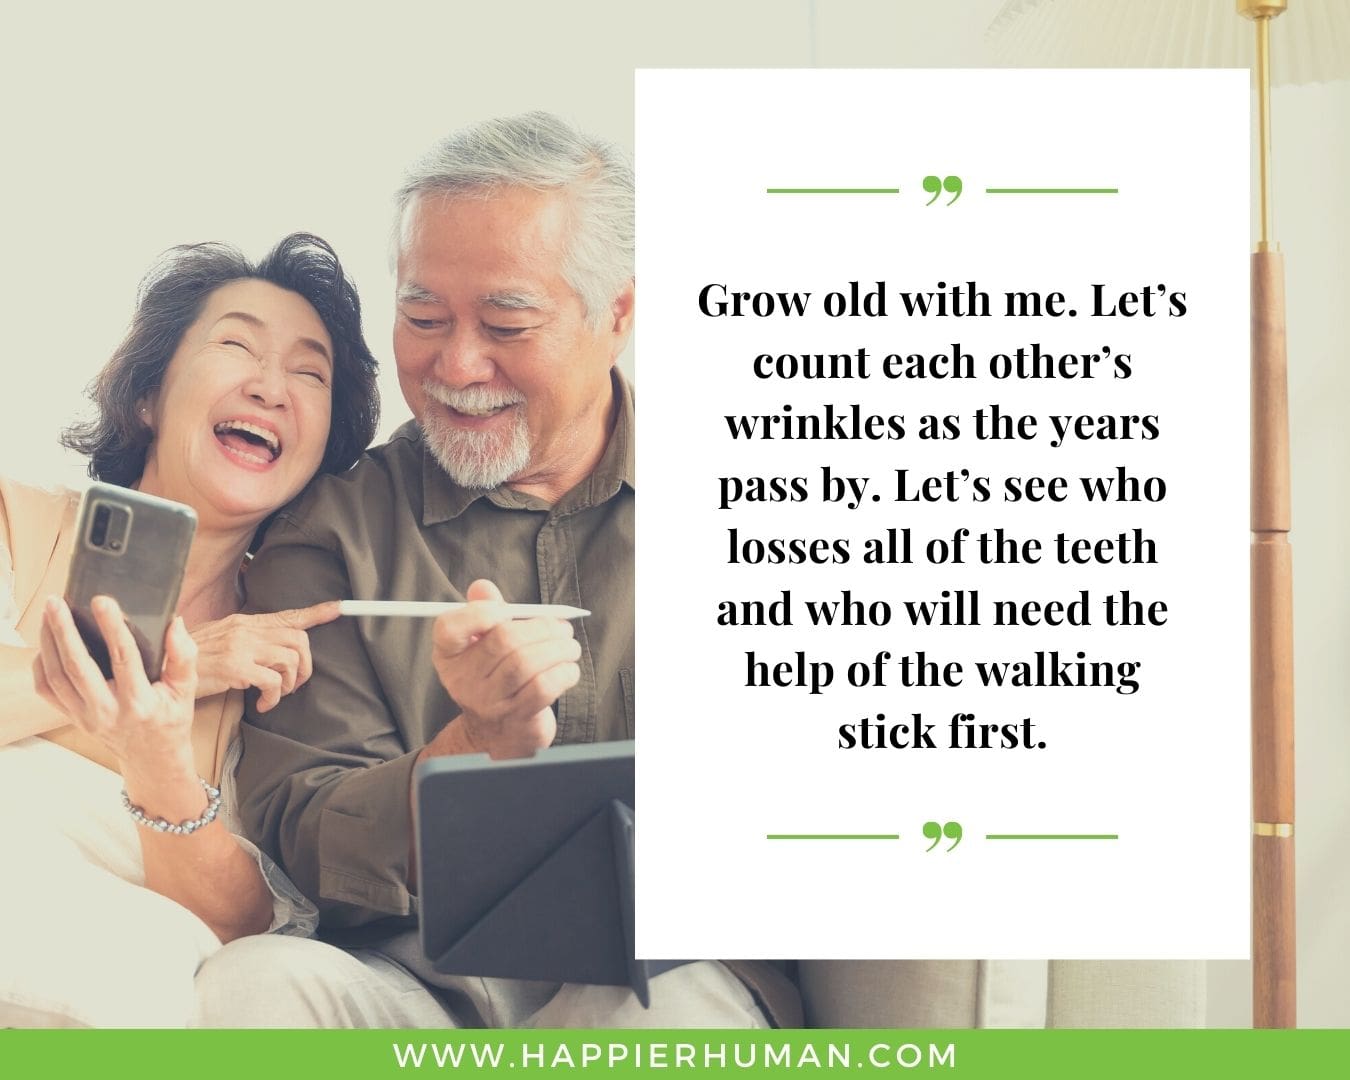 Relationship quotes of love and caring- “Grow old with me. Let’s count each other’s wrinkles as the years pass by. Let’s see who losses all of the teeth and who will need the help of the walking stick first.”